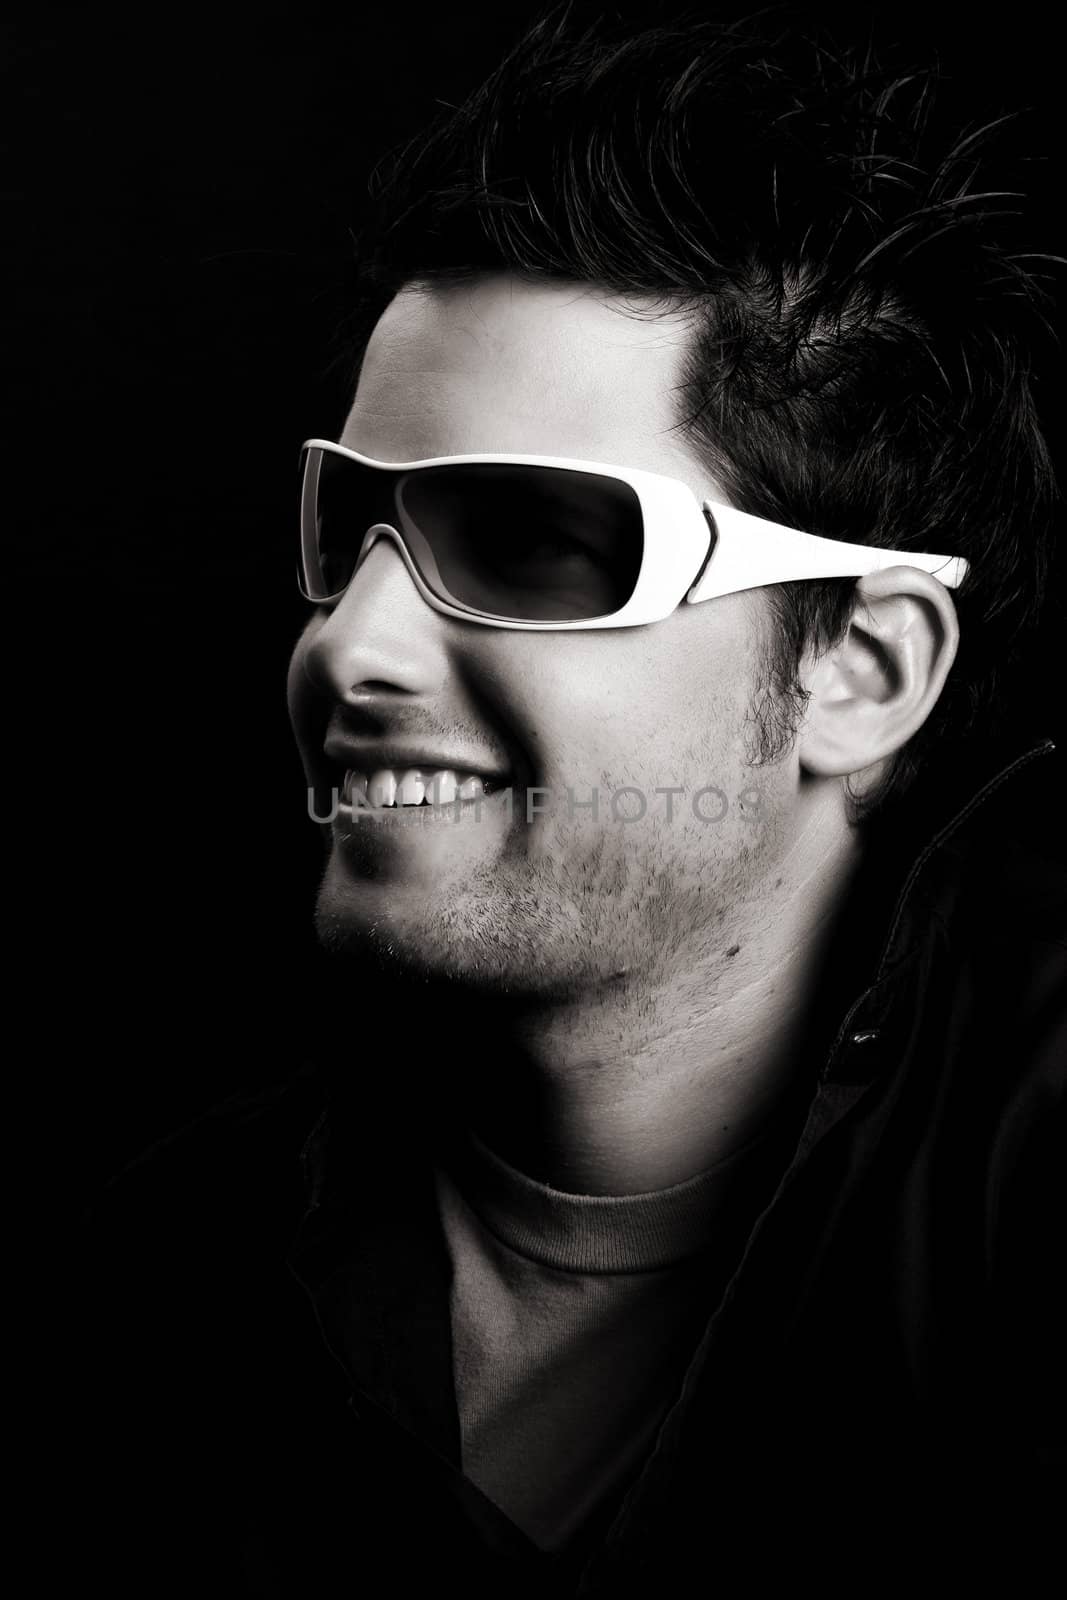 Attractive male wearing sunglasses against black background